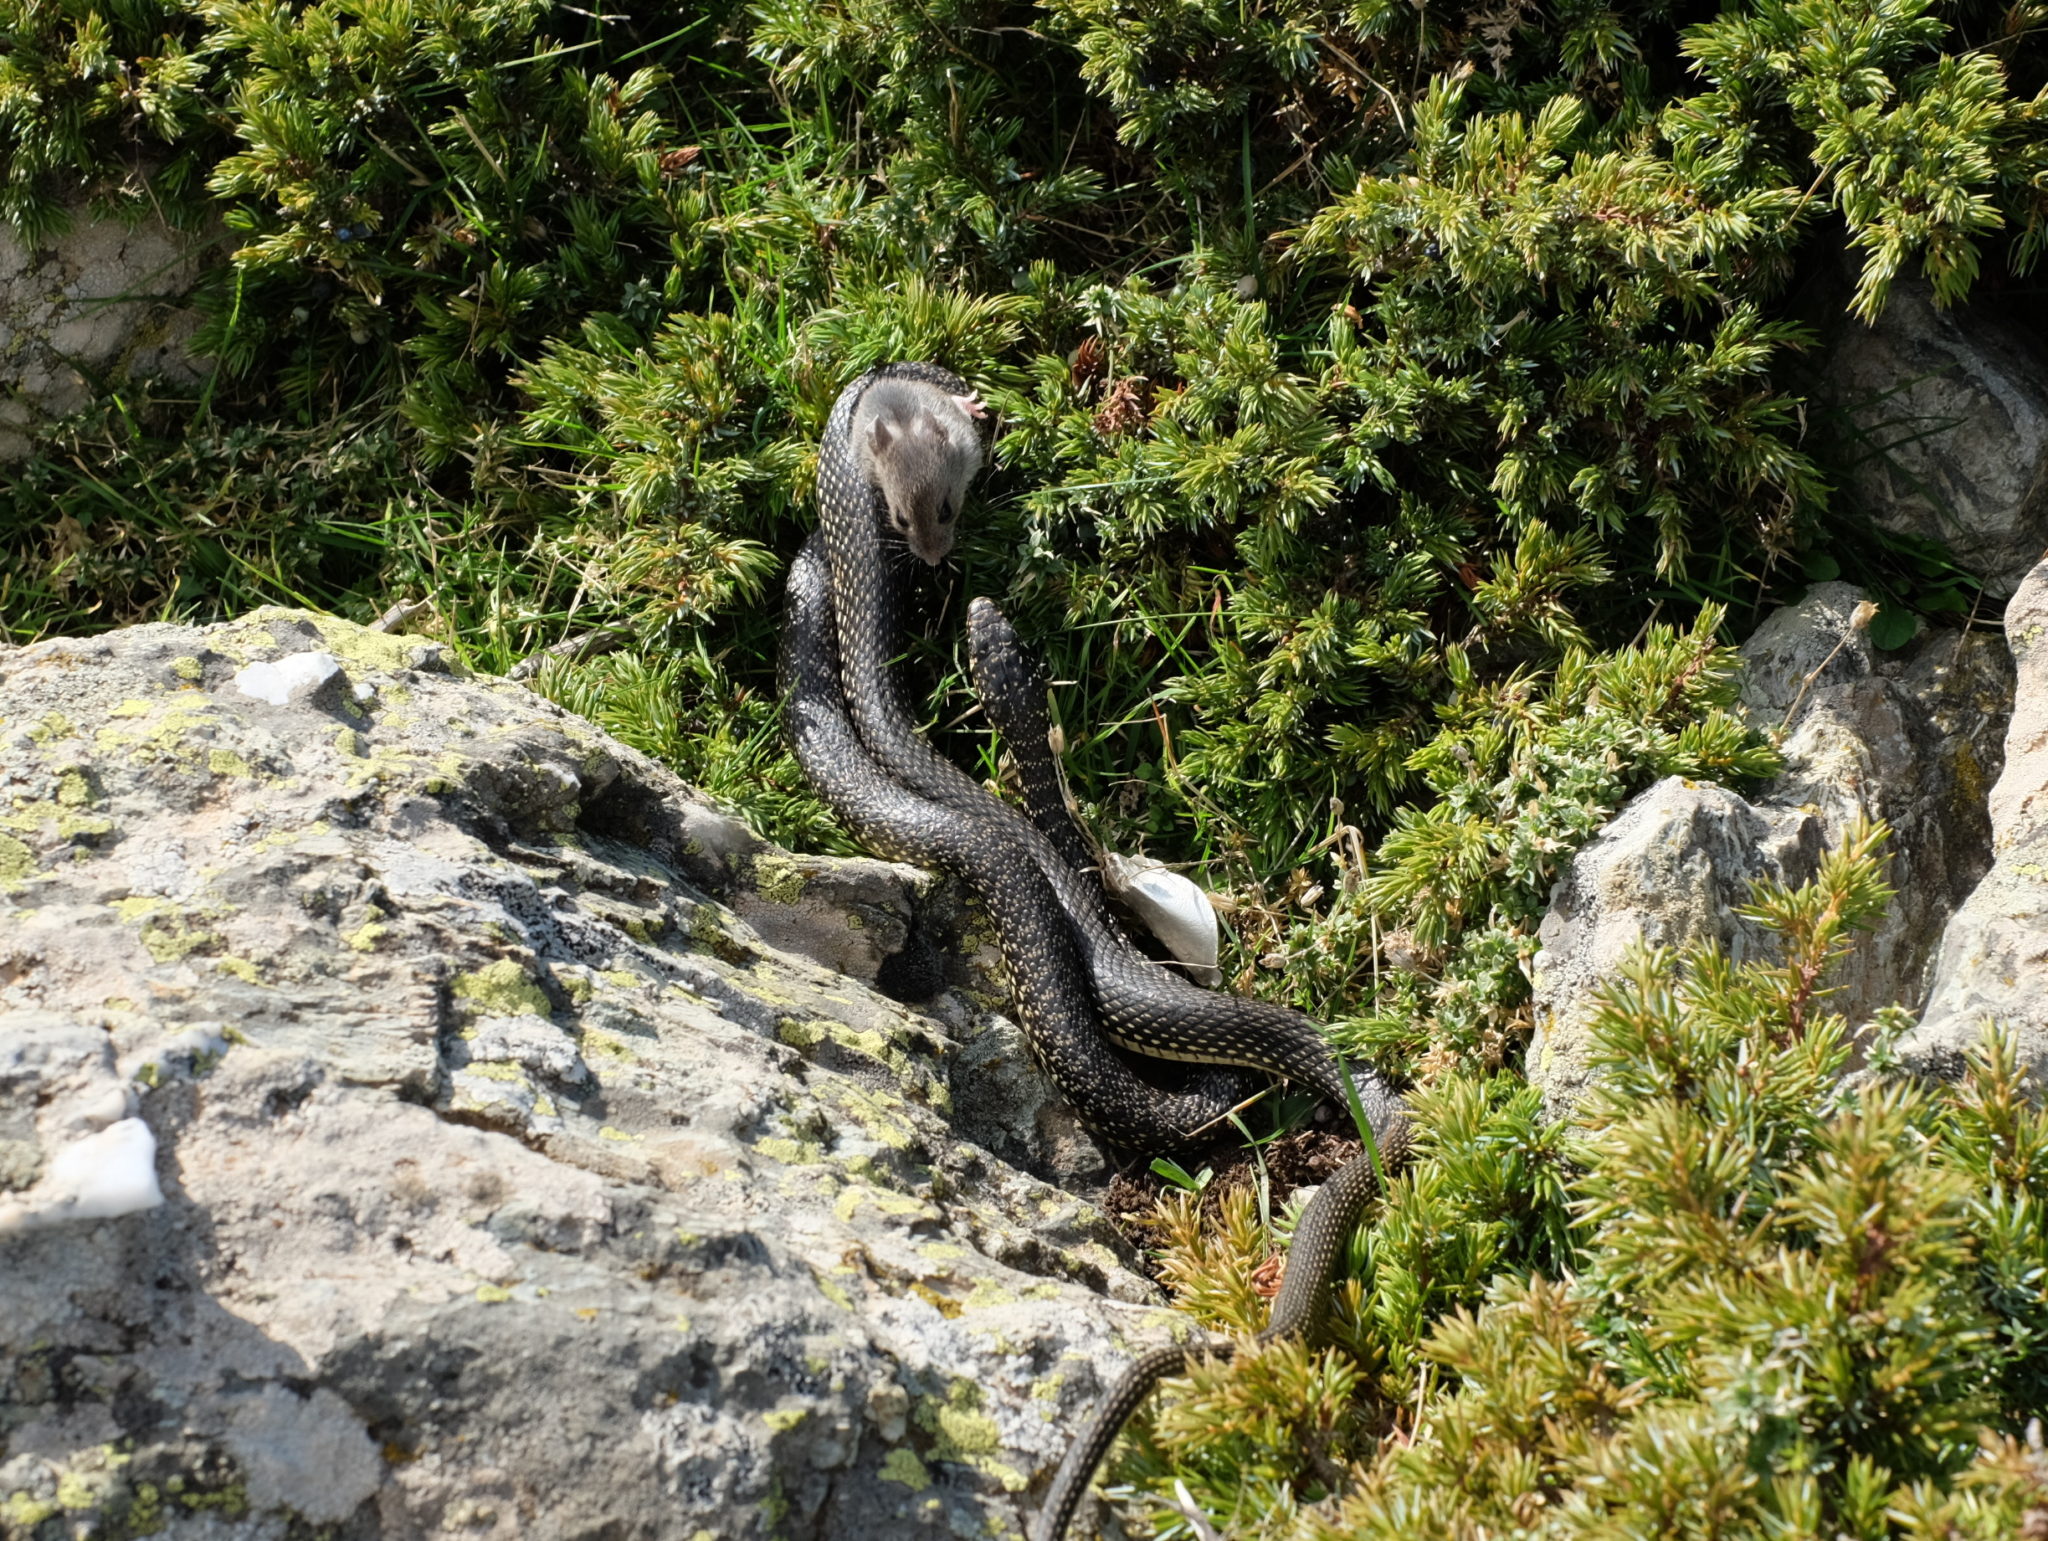 A green whip snake curled around a helpless mouse giving it a final look. At the top of Punta La Marmora, the highest summit of Sardinia, Italy.